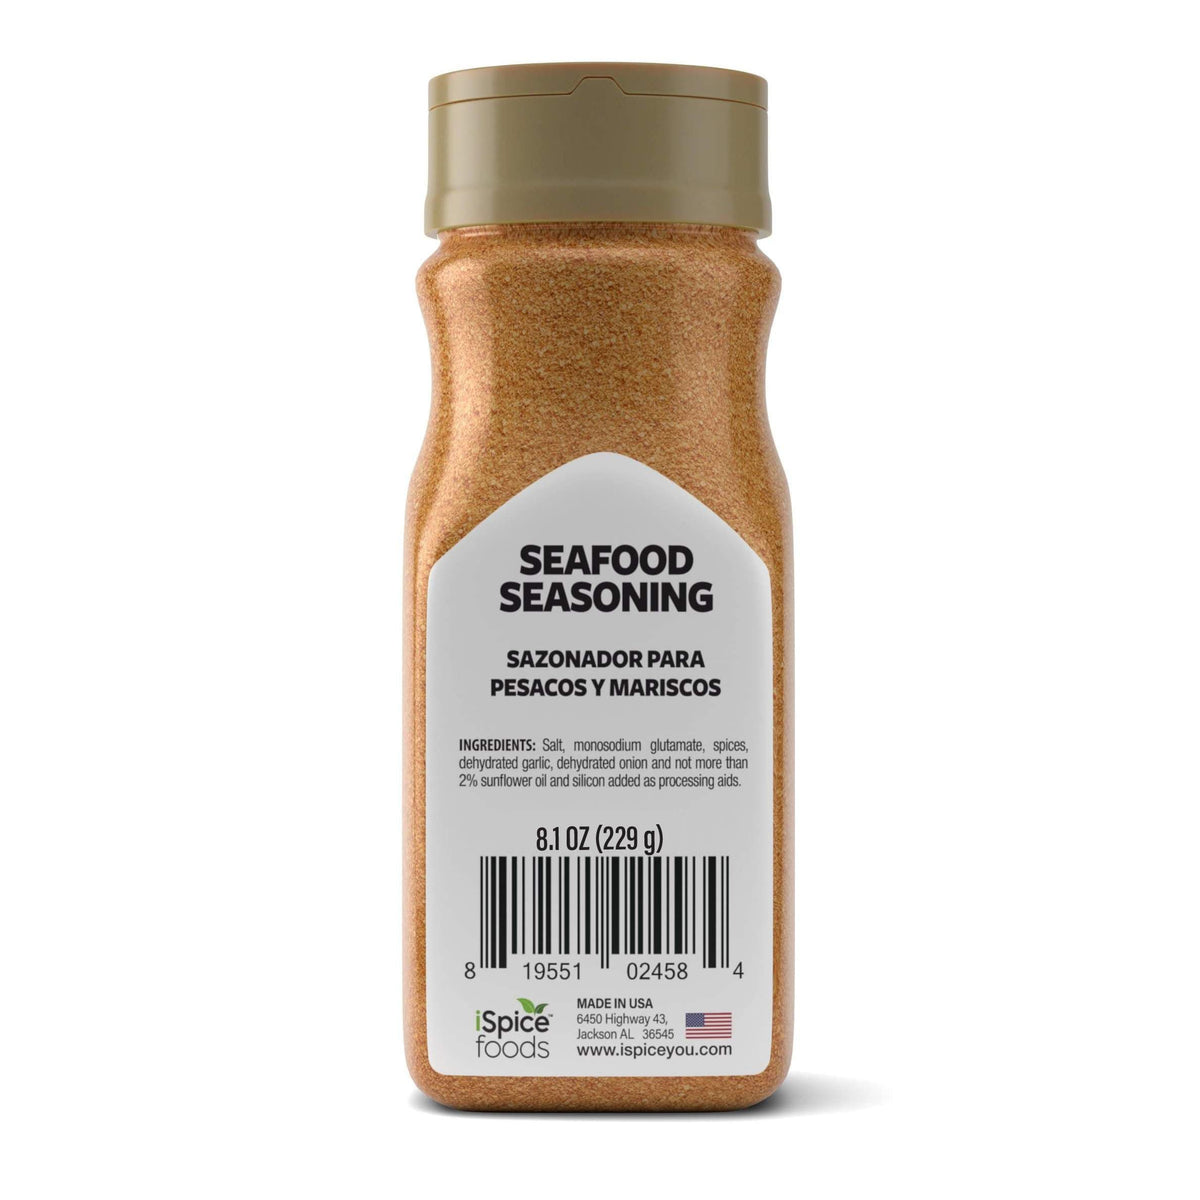 DIY Seafood Seasonings Guide - Create Your Own Unique Blends 